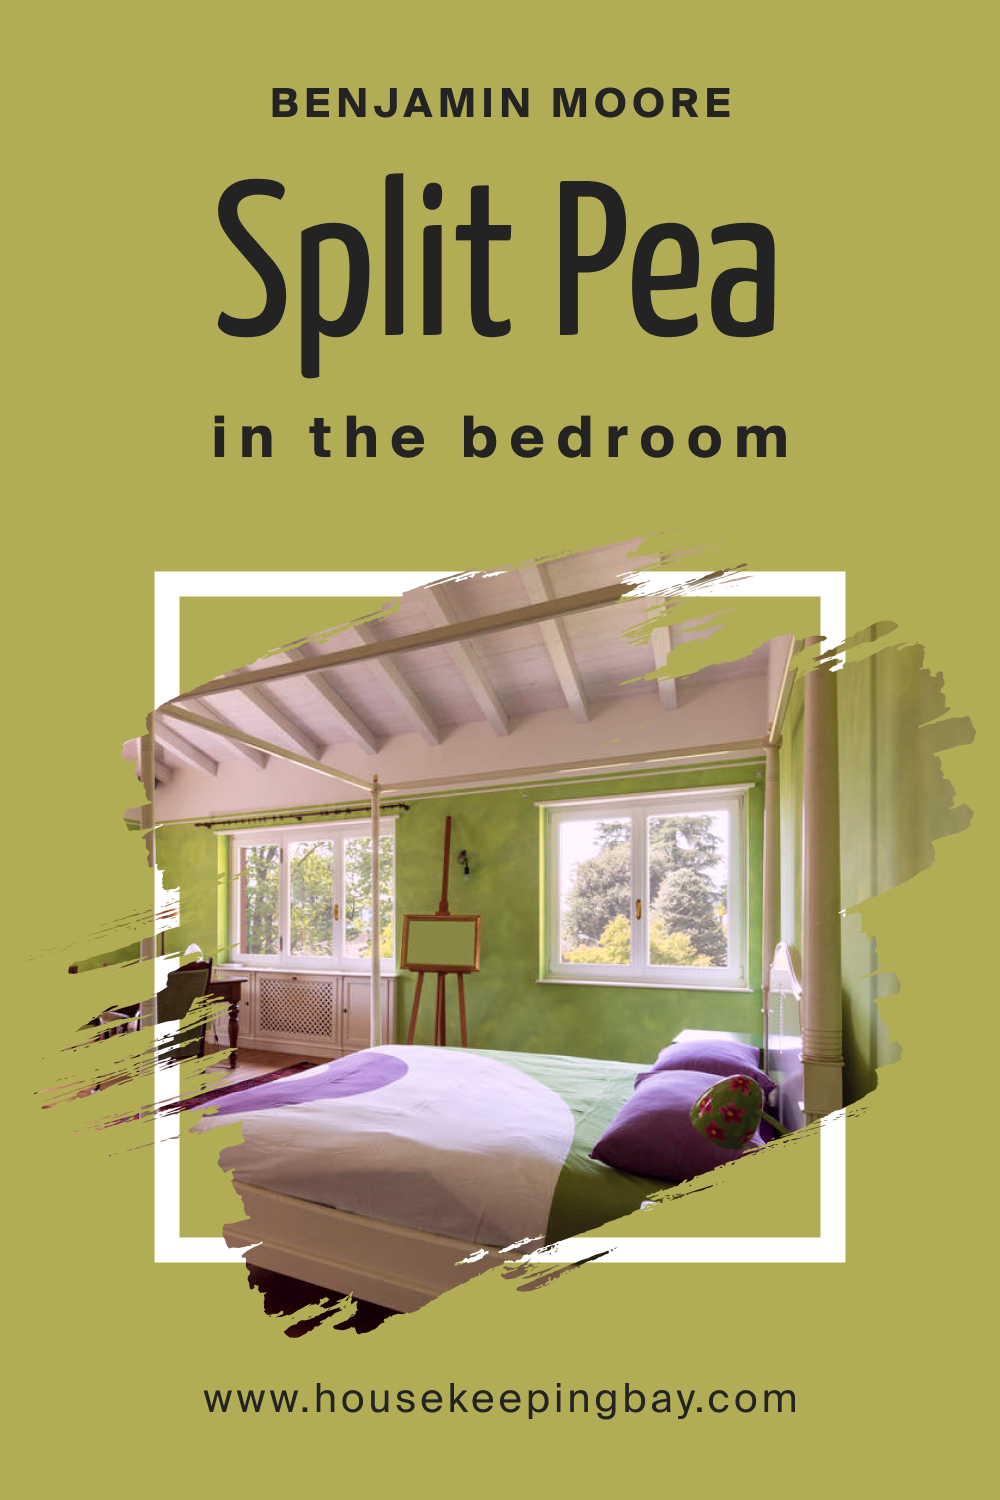 How to Use Split Pea 2146-30 in the Bedroom?